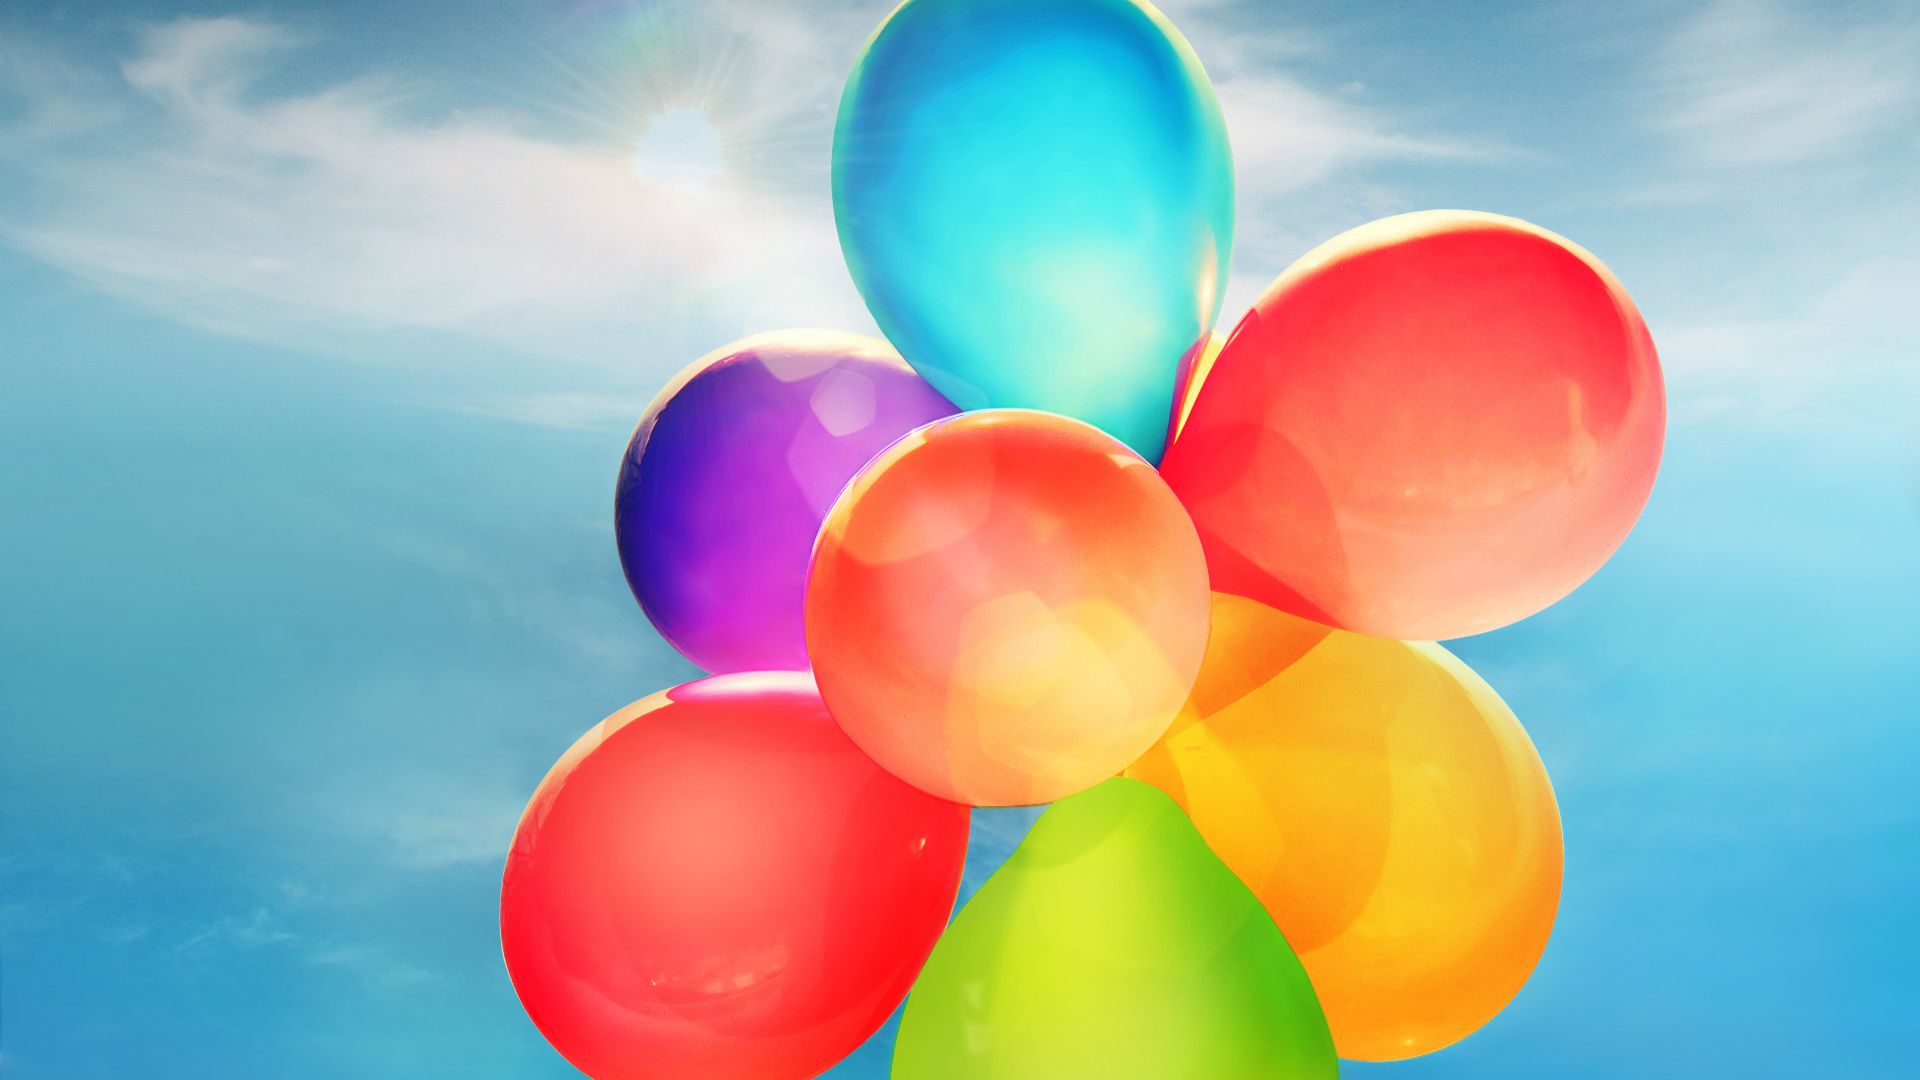 Wallpaper Colorful balloons in sky